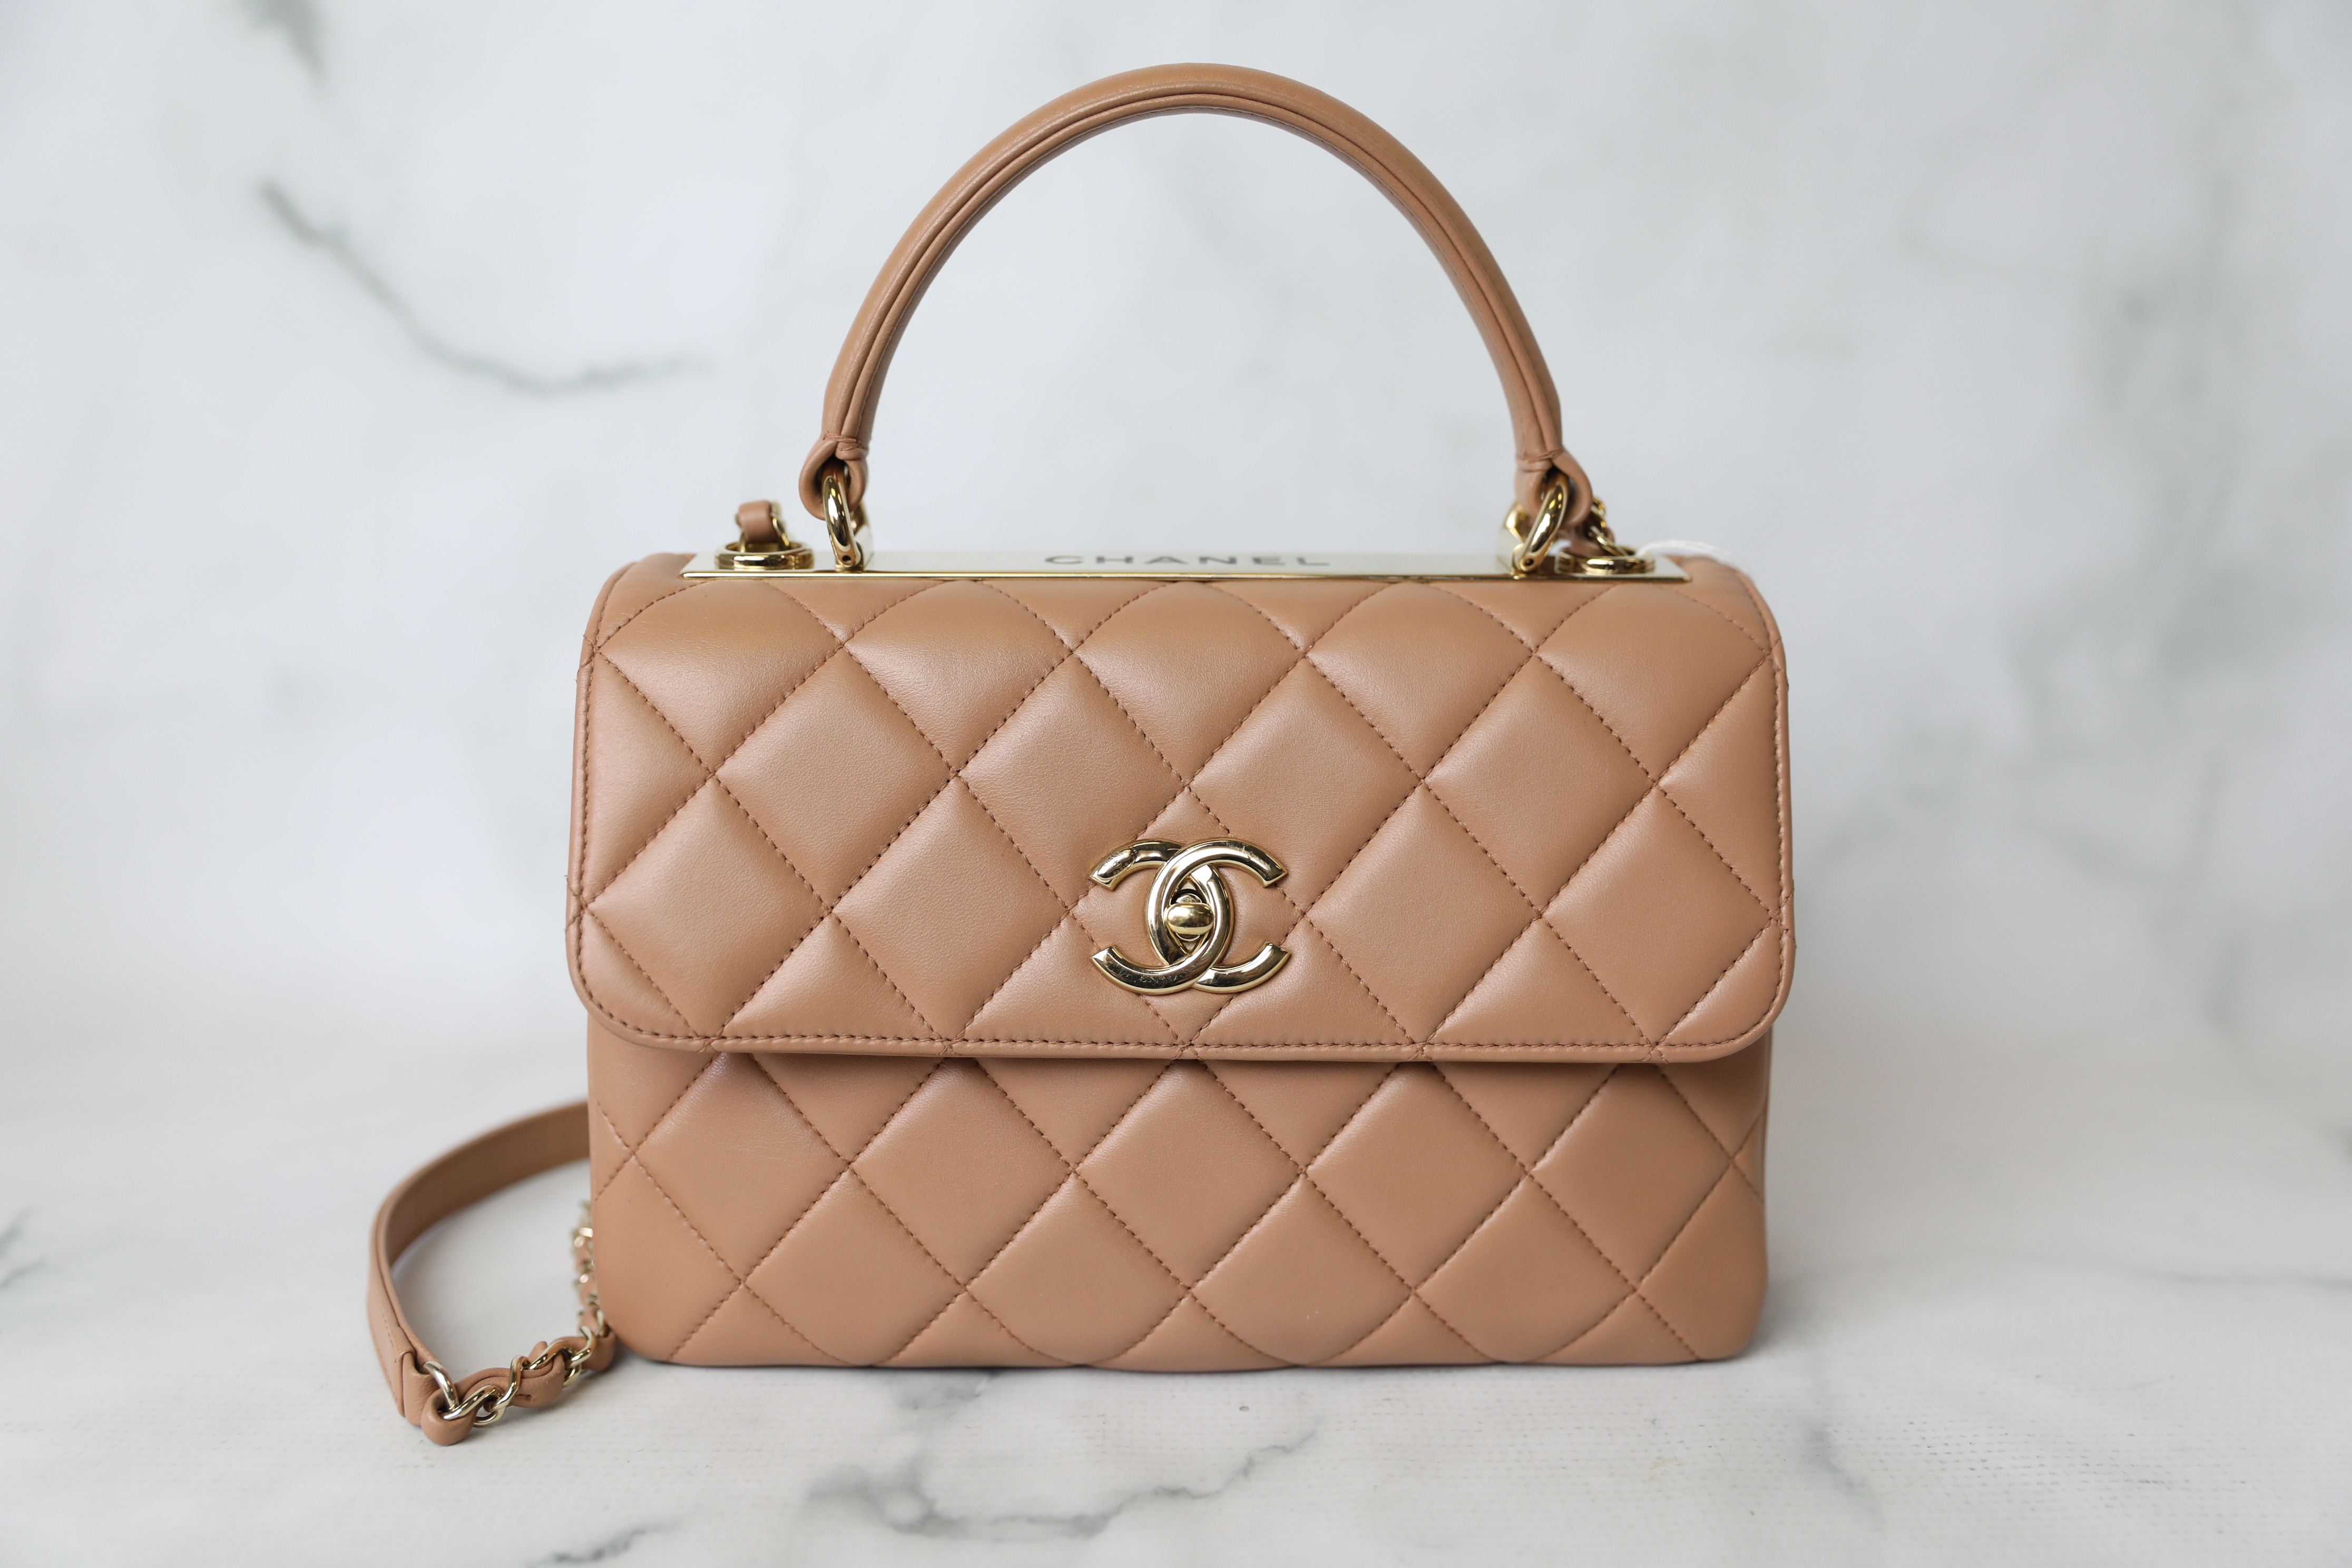 Chanel Trendy Small, Caramel Brown Lambskin with Gold Hardware, Preowned in  Dustbag WA001 - Julia Rose Boston